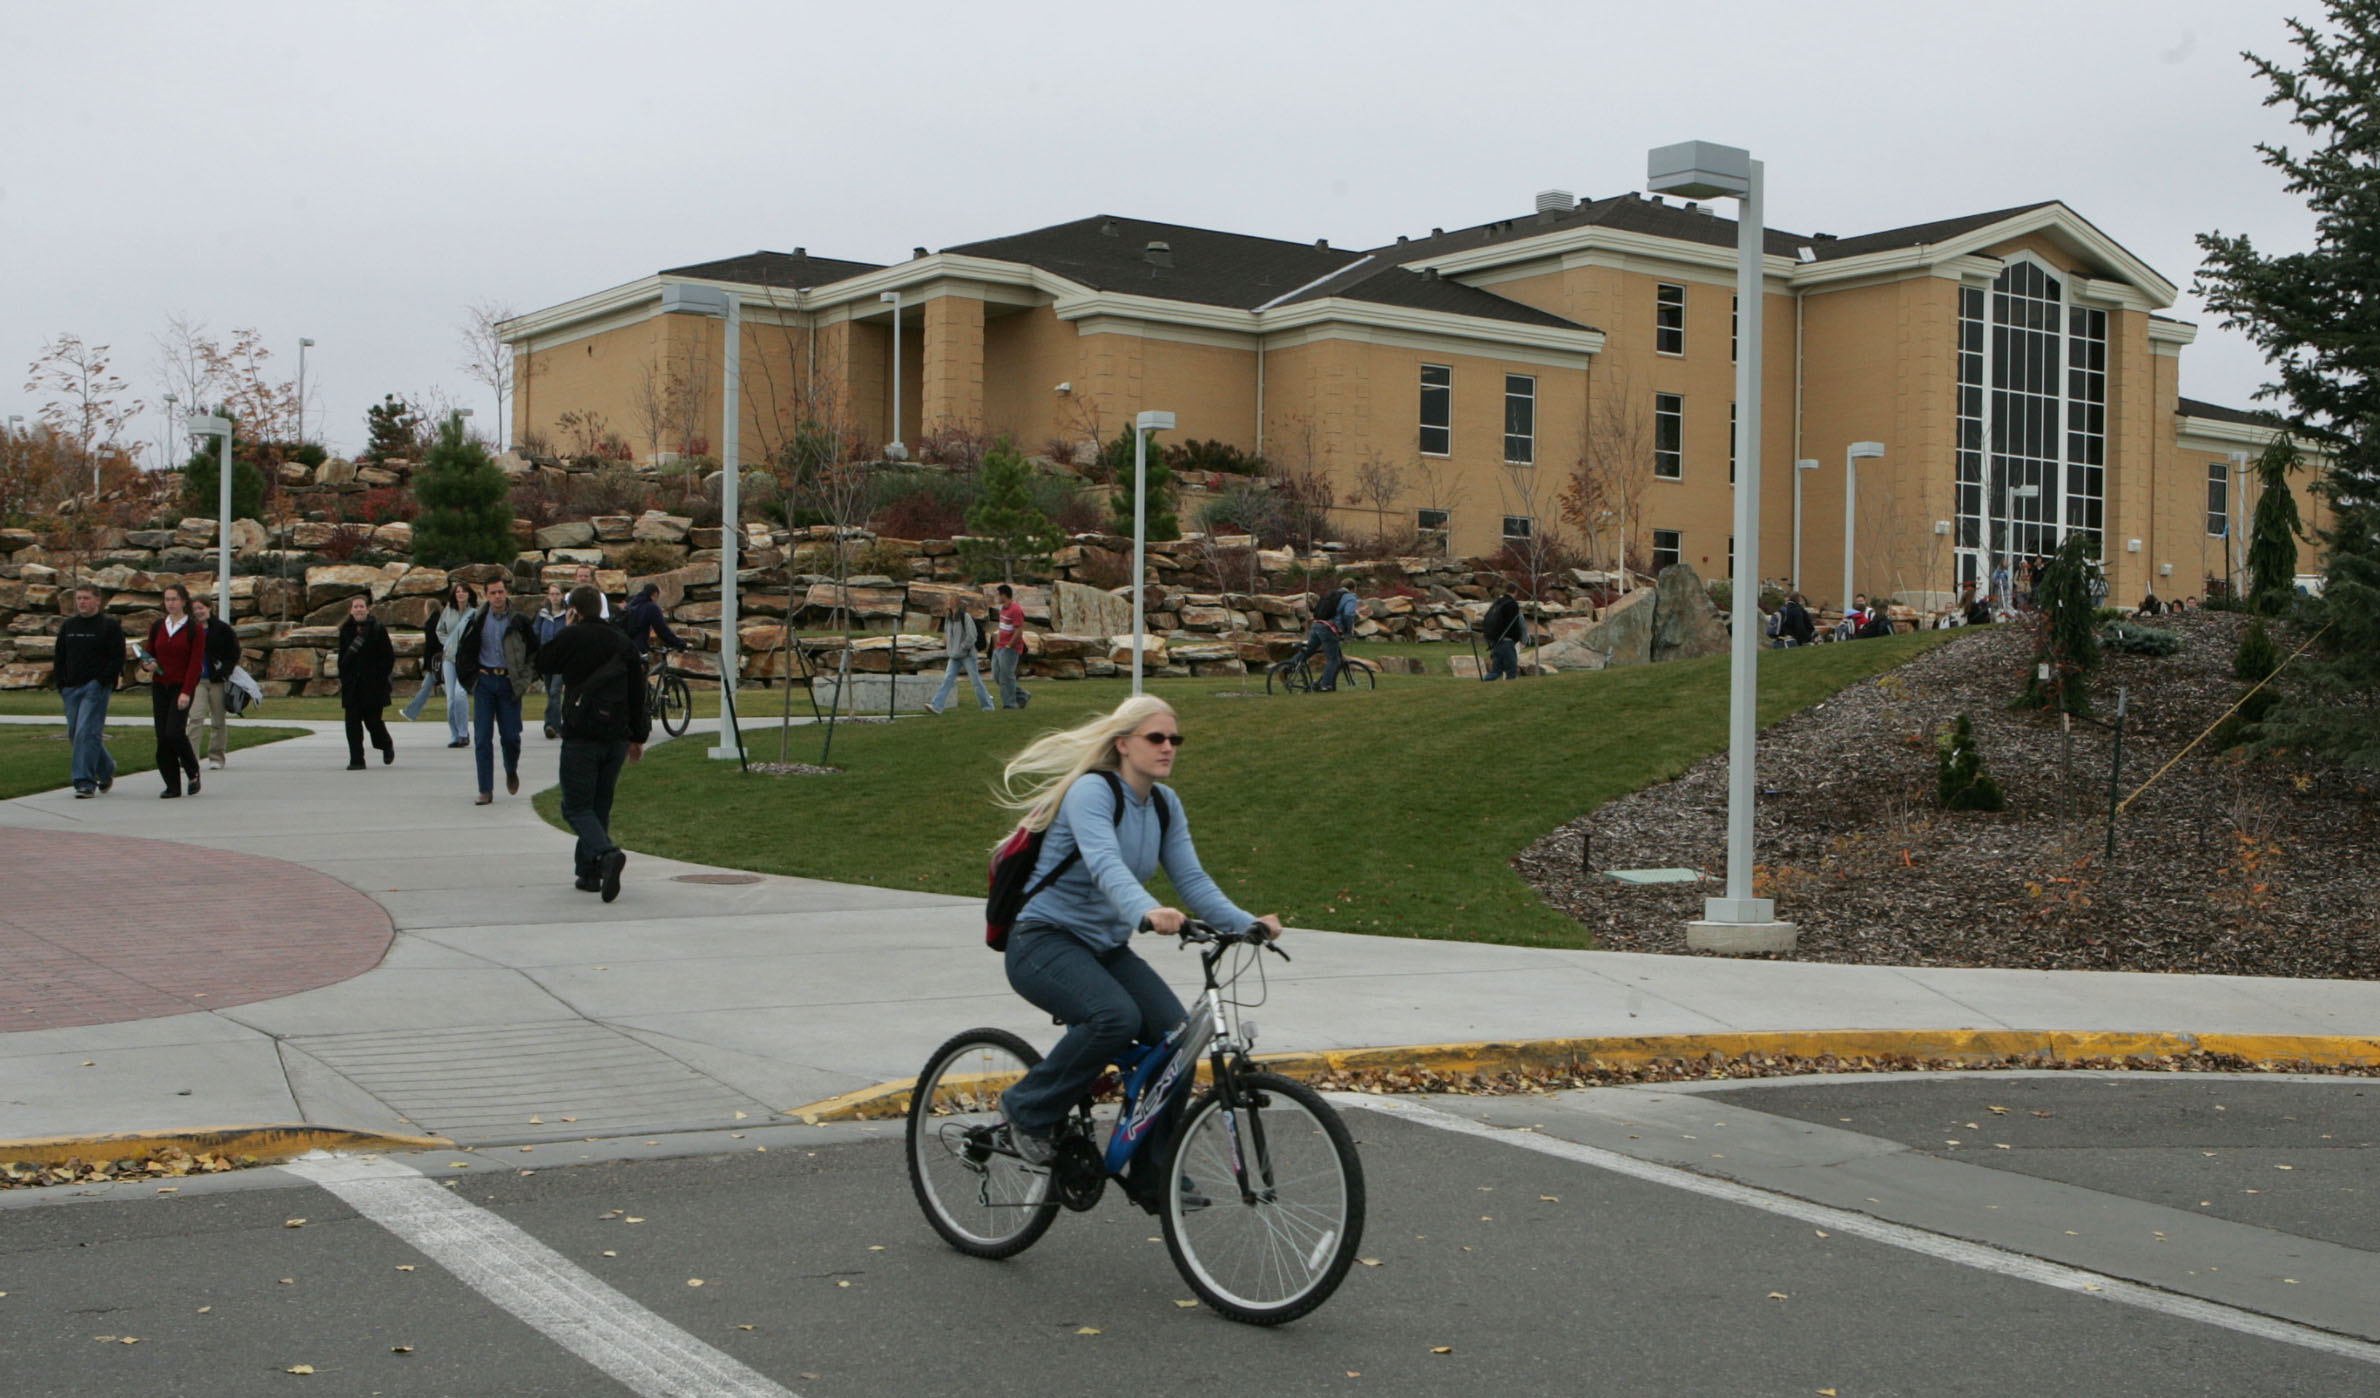 a woman rides a bike in a cross walk in front of an educational building...